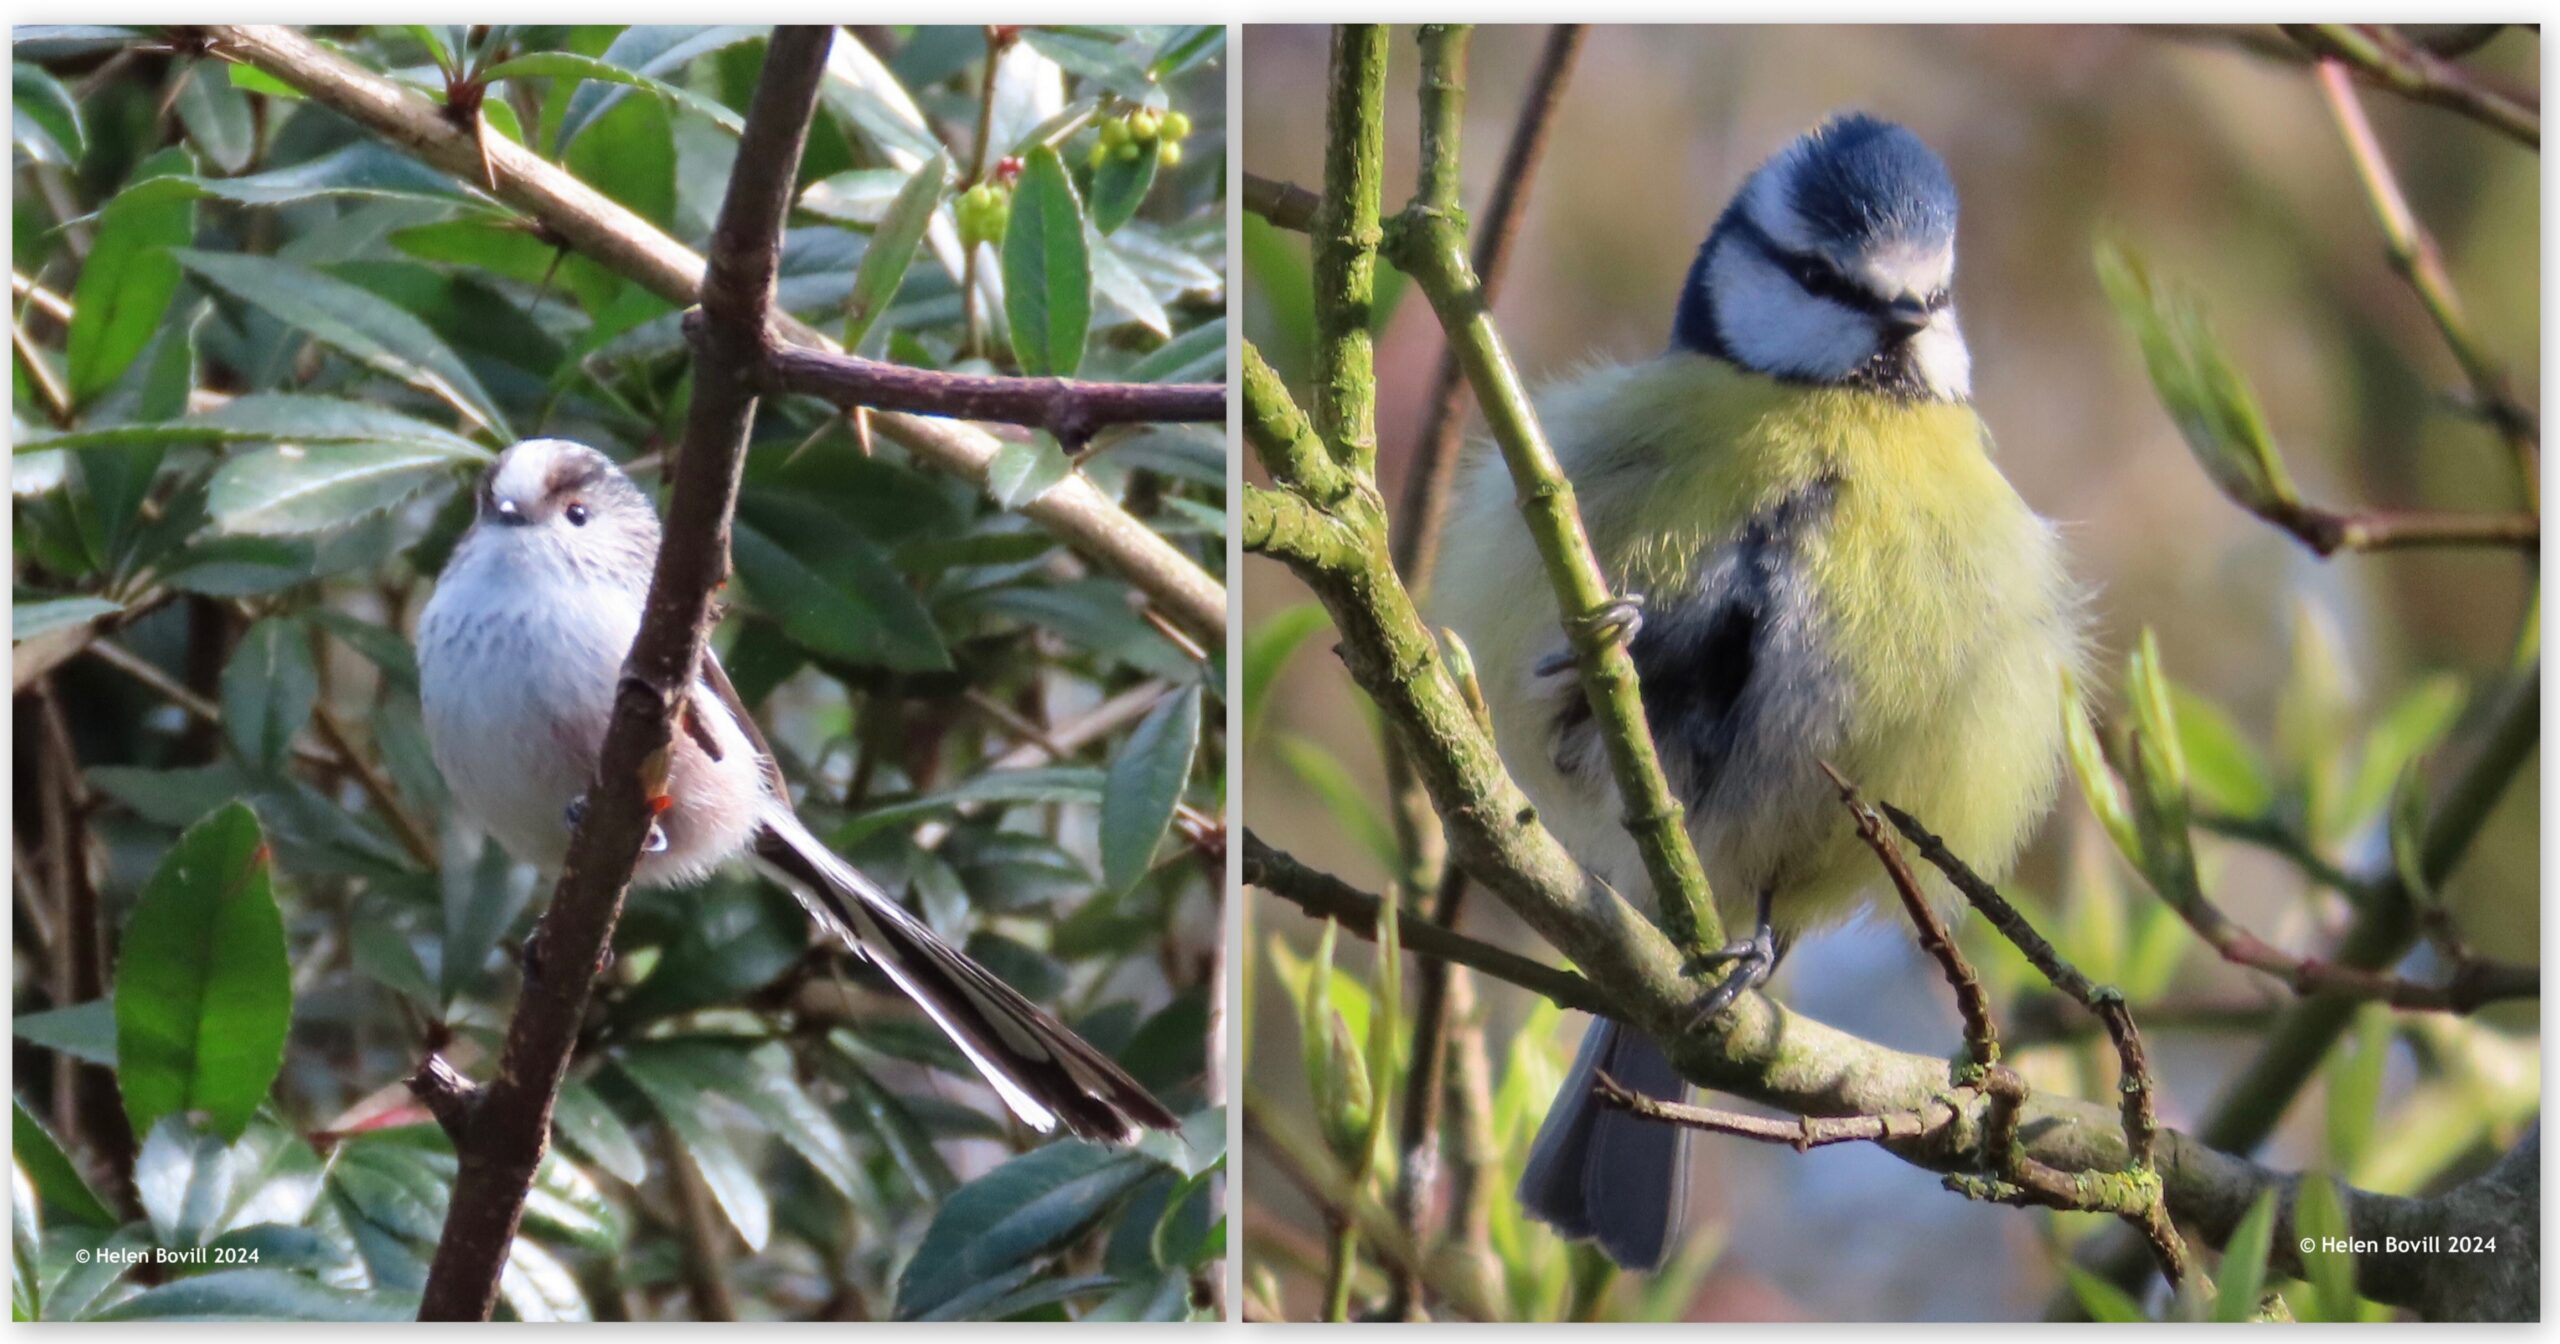 Avian cemetery wildlife - two photos, one showing a Long-tailed tit and the other showing a blue tit